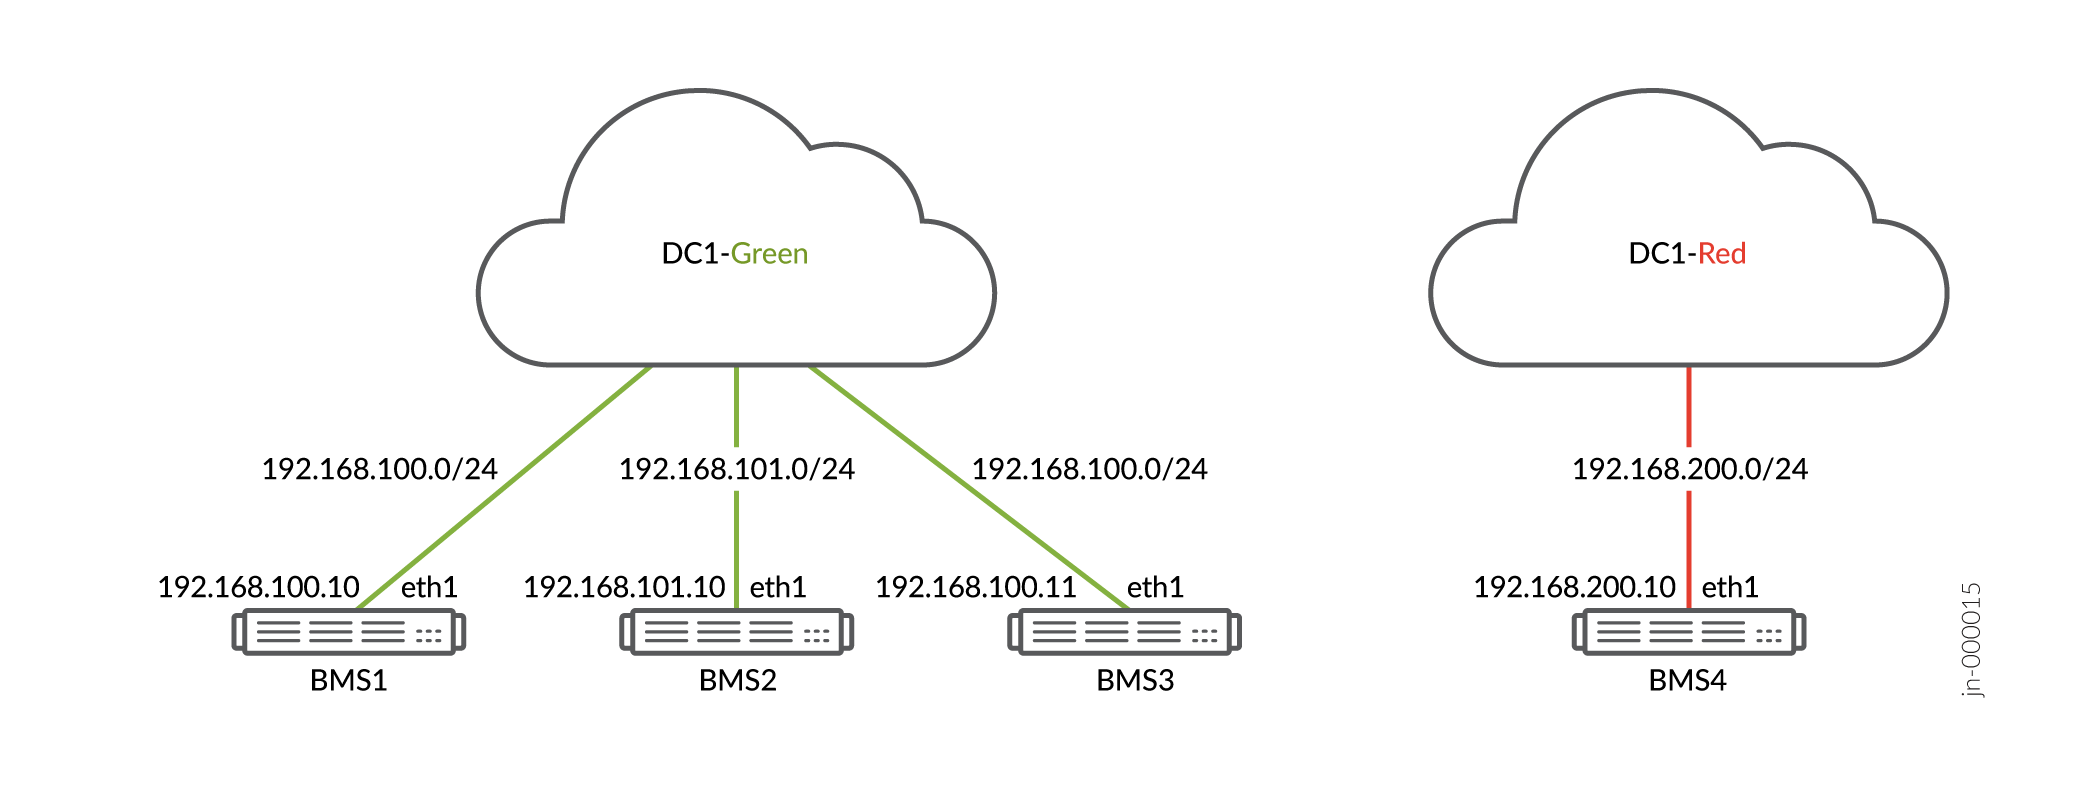 DC1-Green and DC1-Red Overlay Virtual Networks